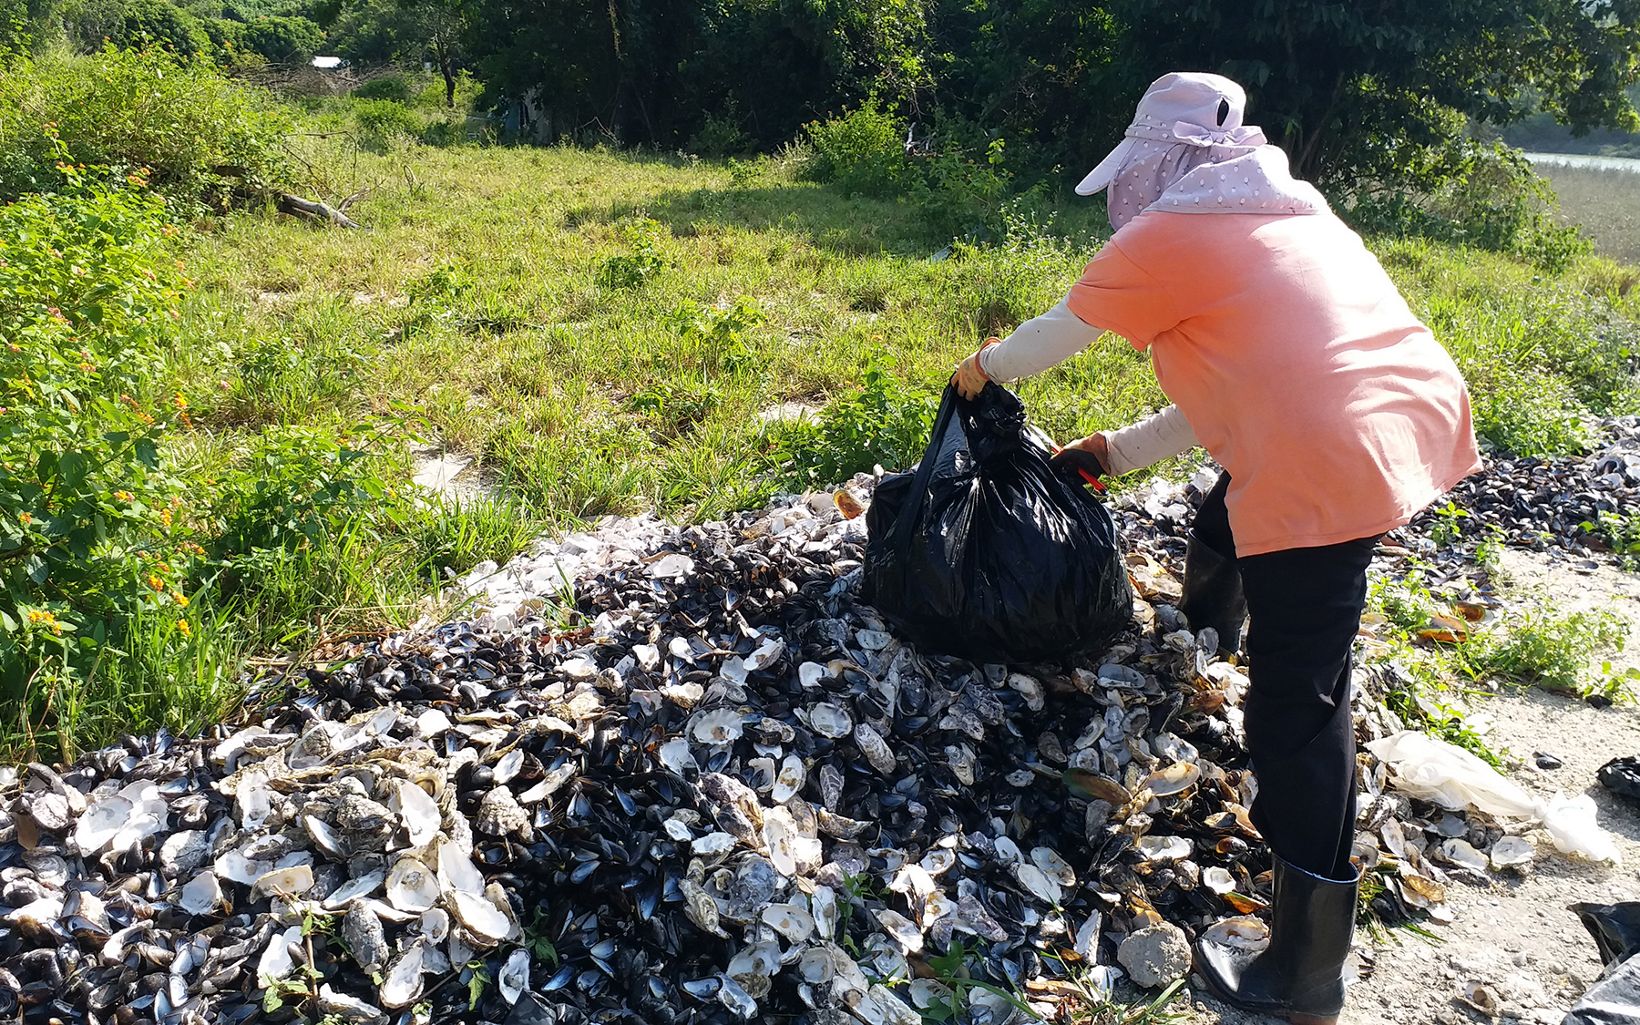 A woman empties a bag of oyster shells onto a pile.